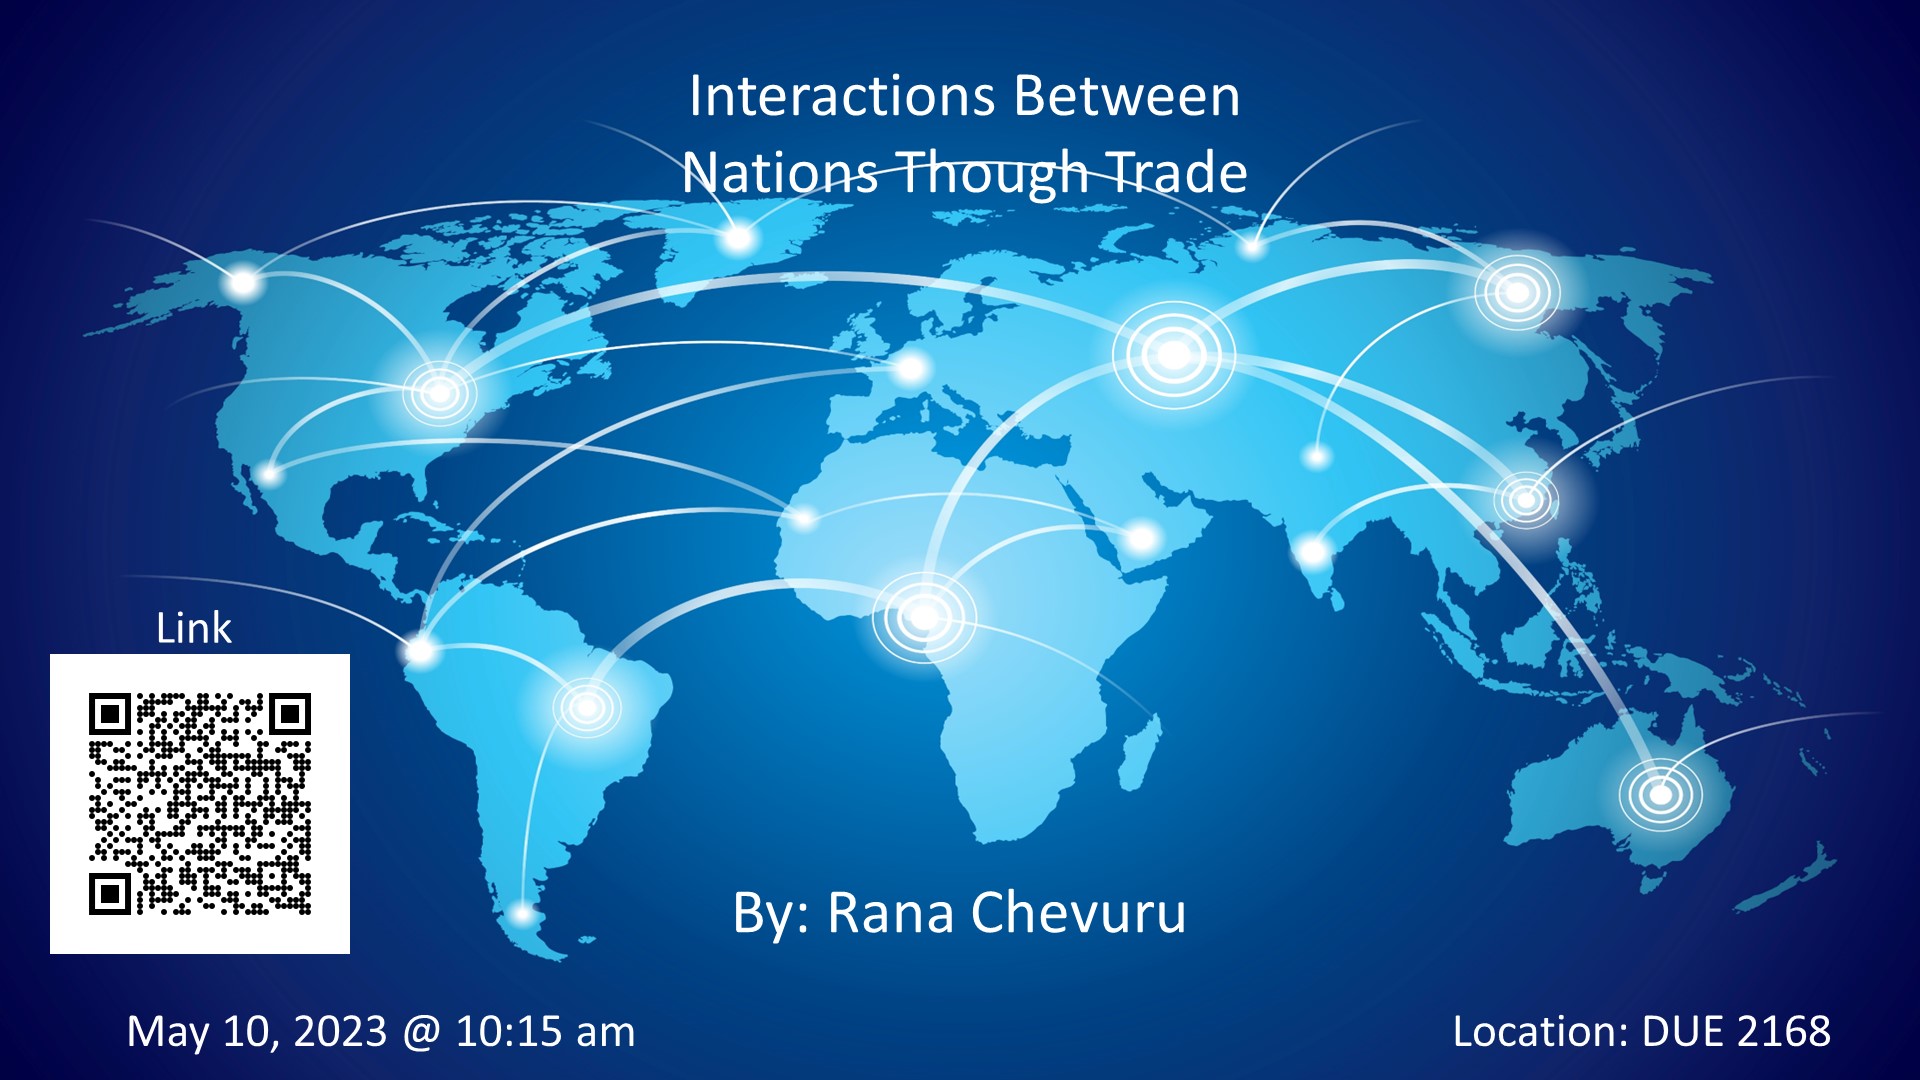 Interactions Between Nations Through Trade